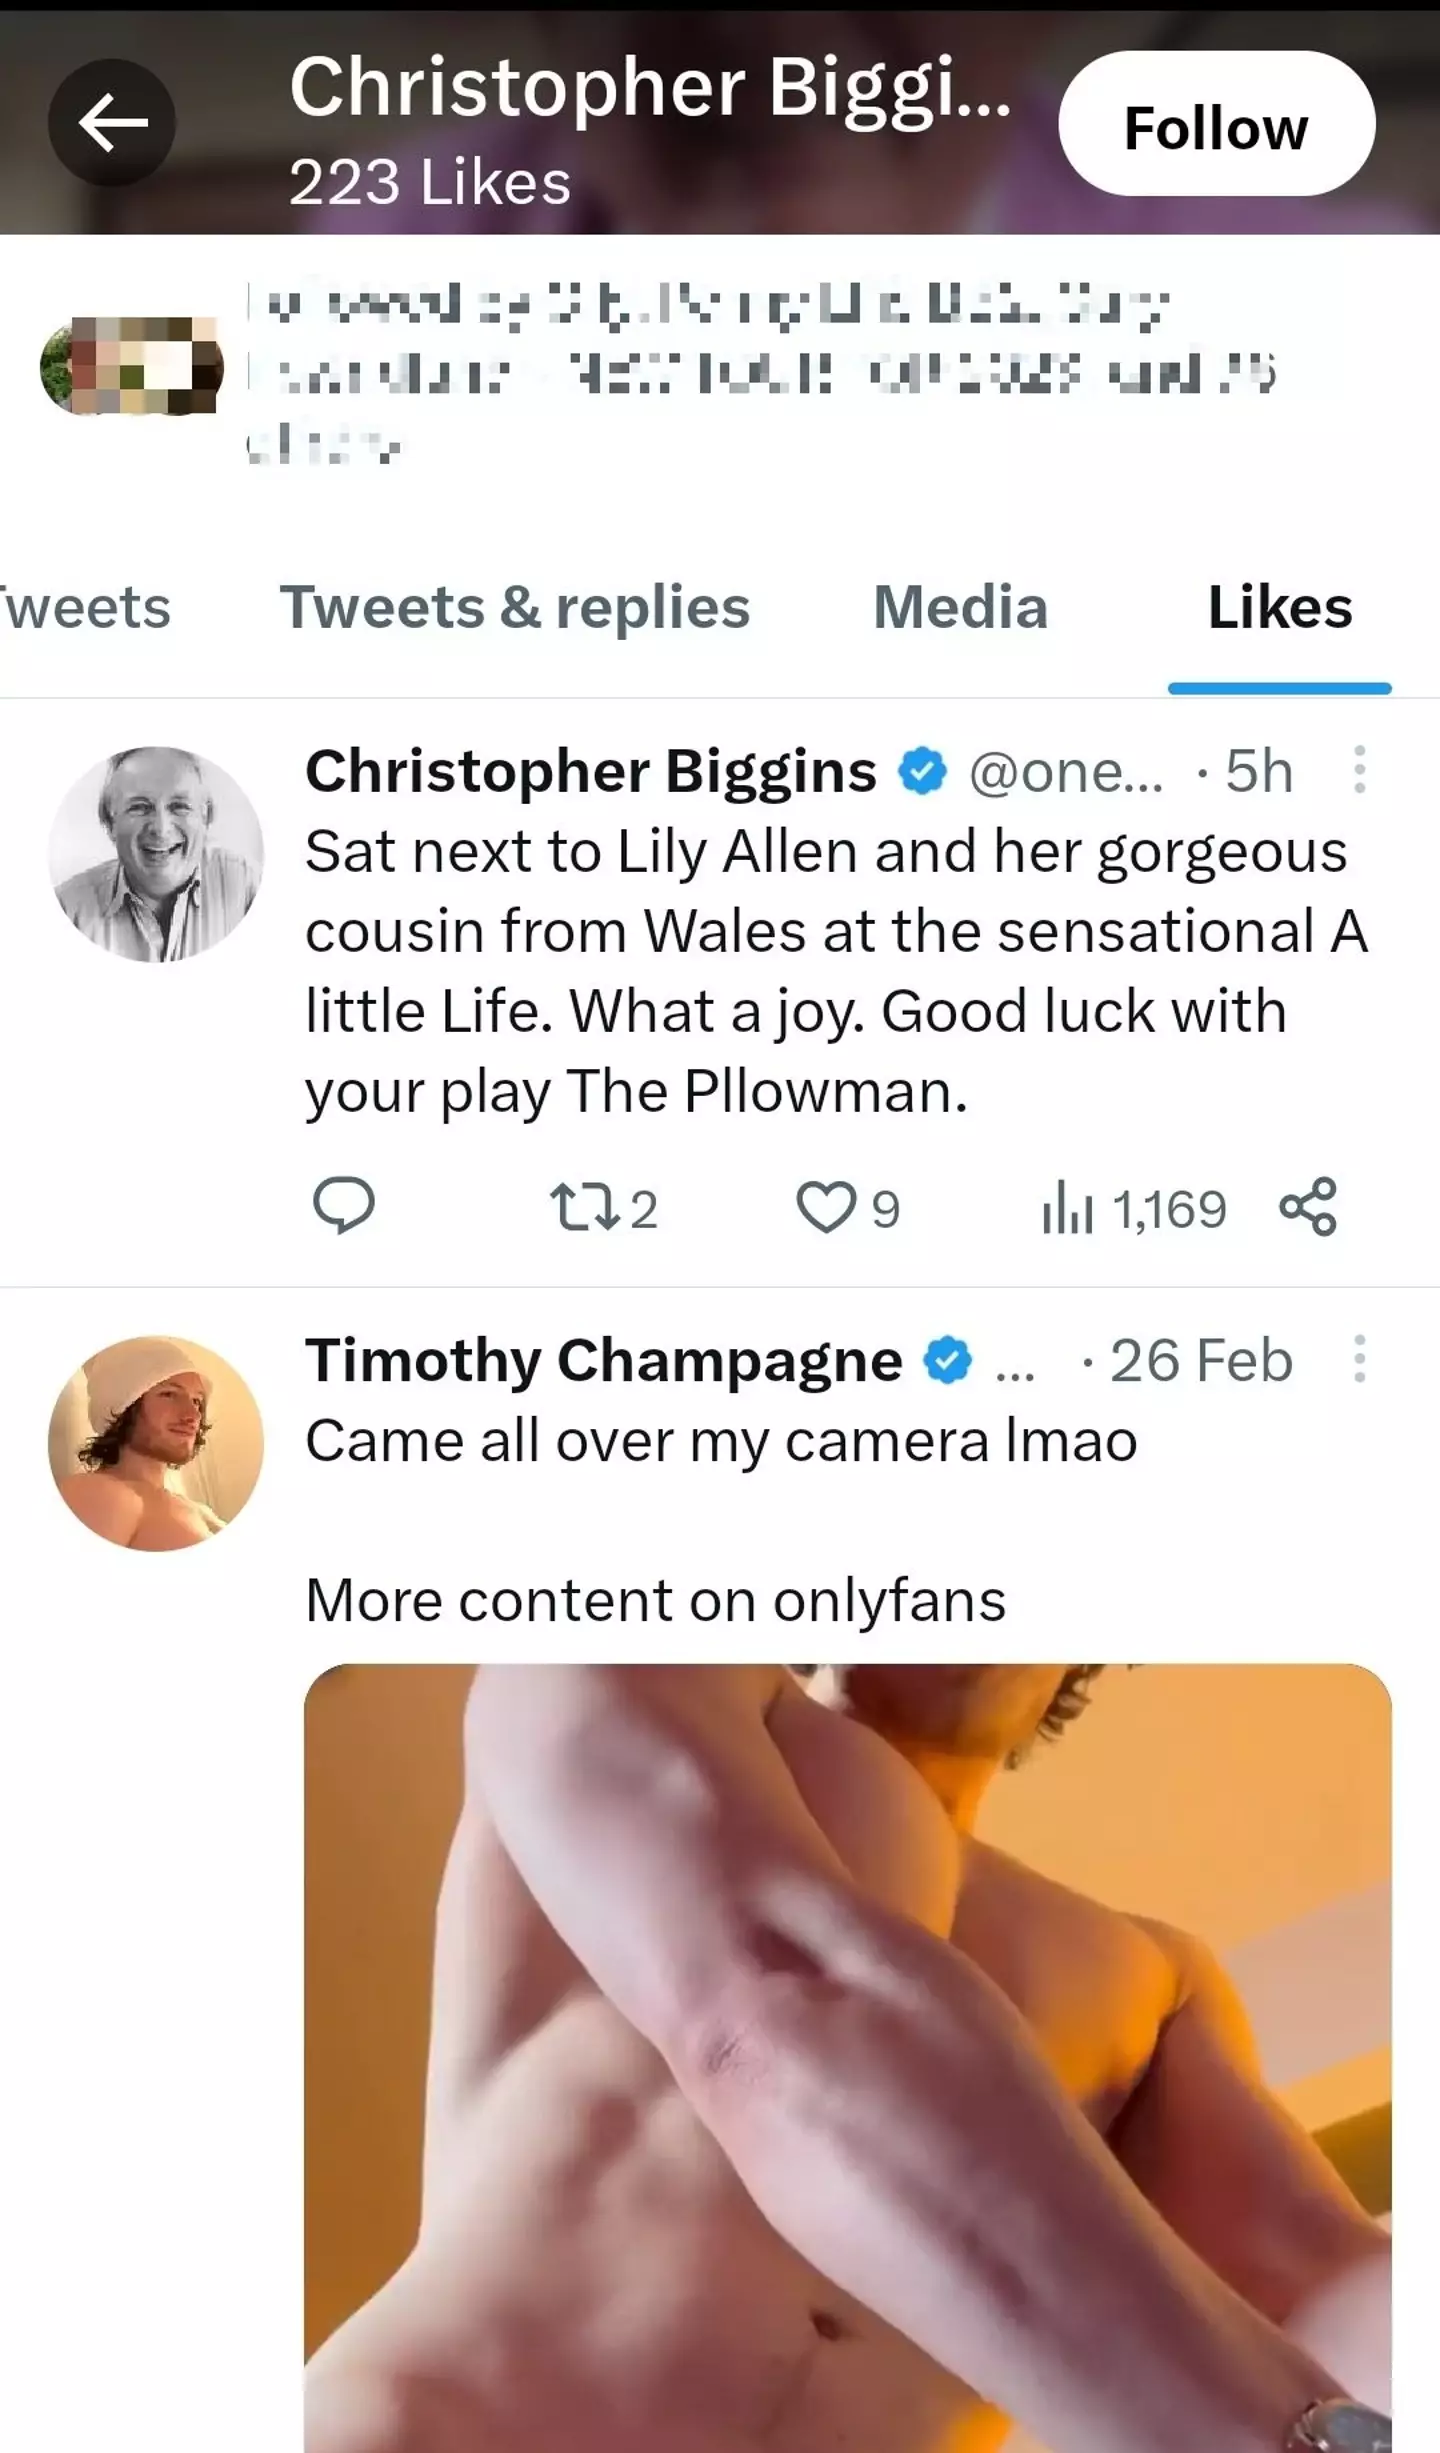 Christopher Biggins' account was seen liking some X-rated content.